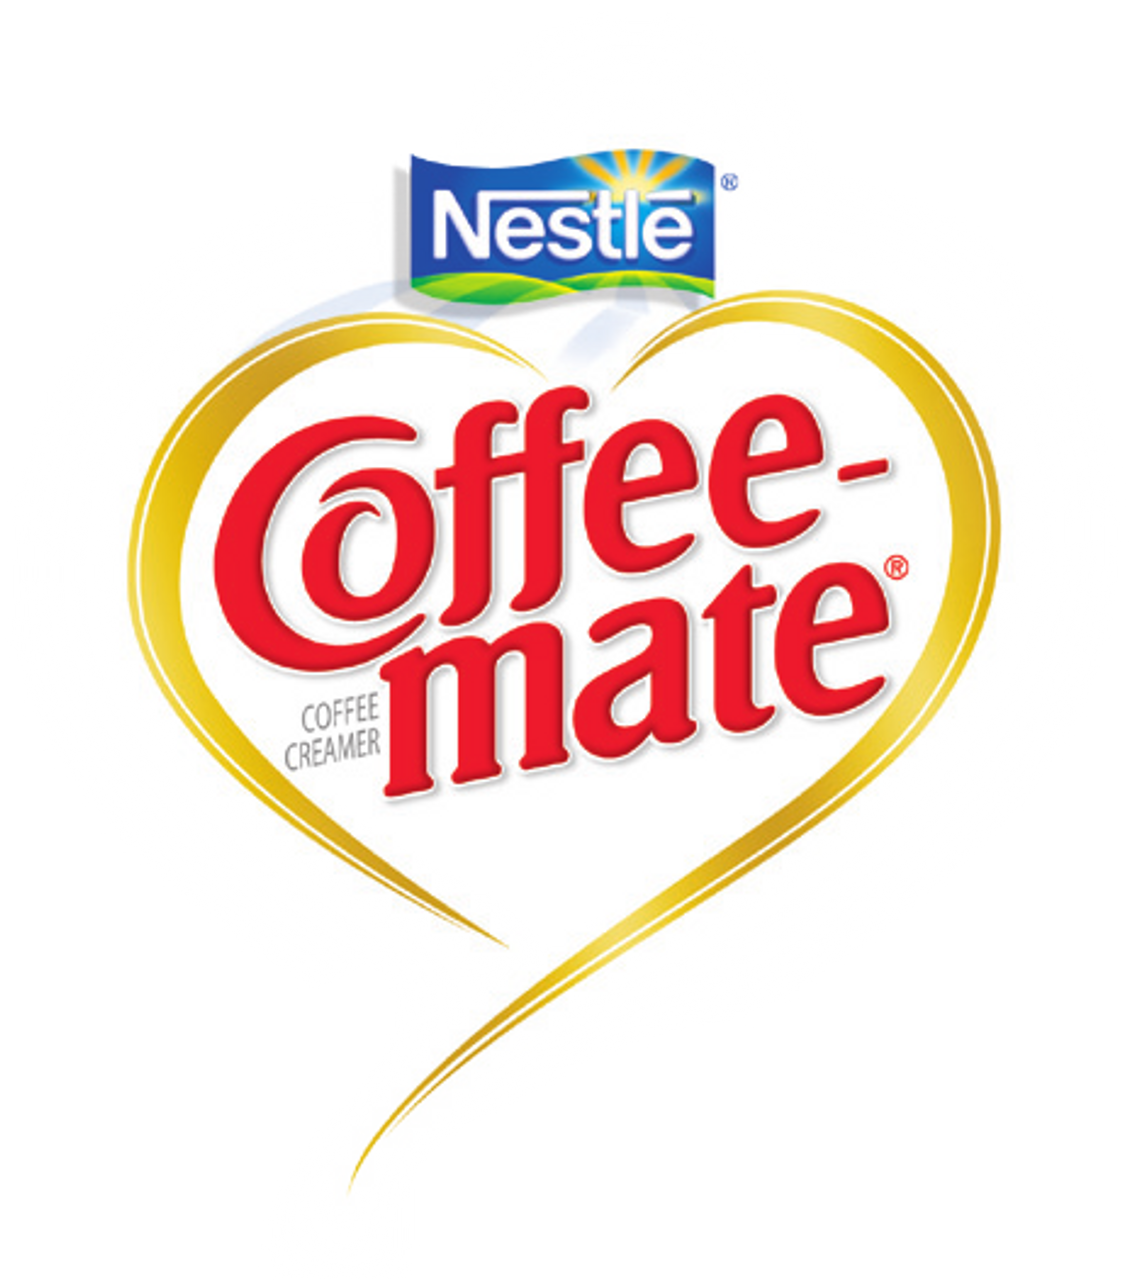 Nestle Coffee mate French Vanilla flavored liquid creamer singles are irresistible. Within each cup is a harmonious blend between a deliciously rich, velvety smooth classic and bright French Vanilla notes that will enhance and enrich your coffee offering.